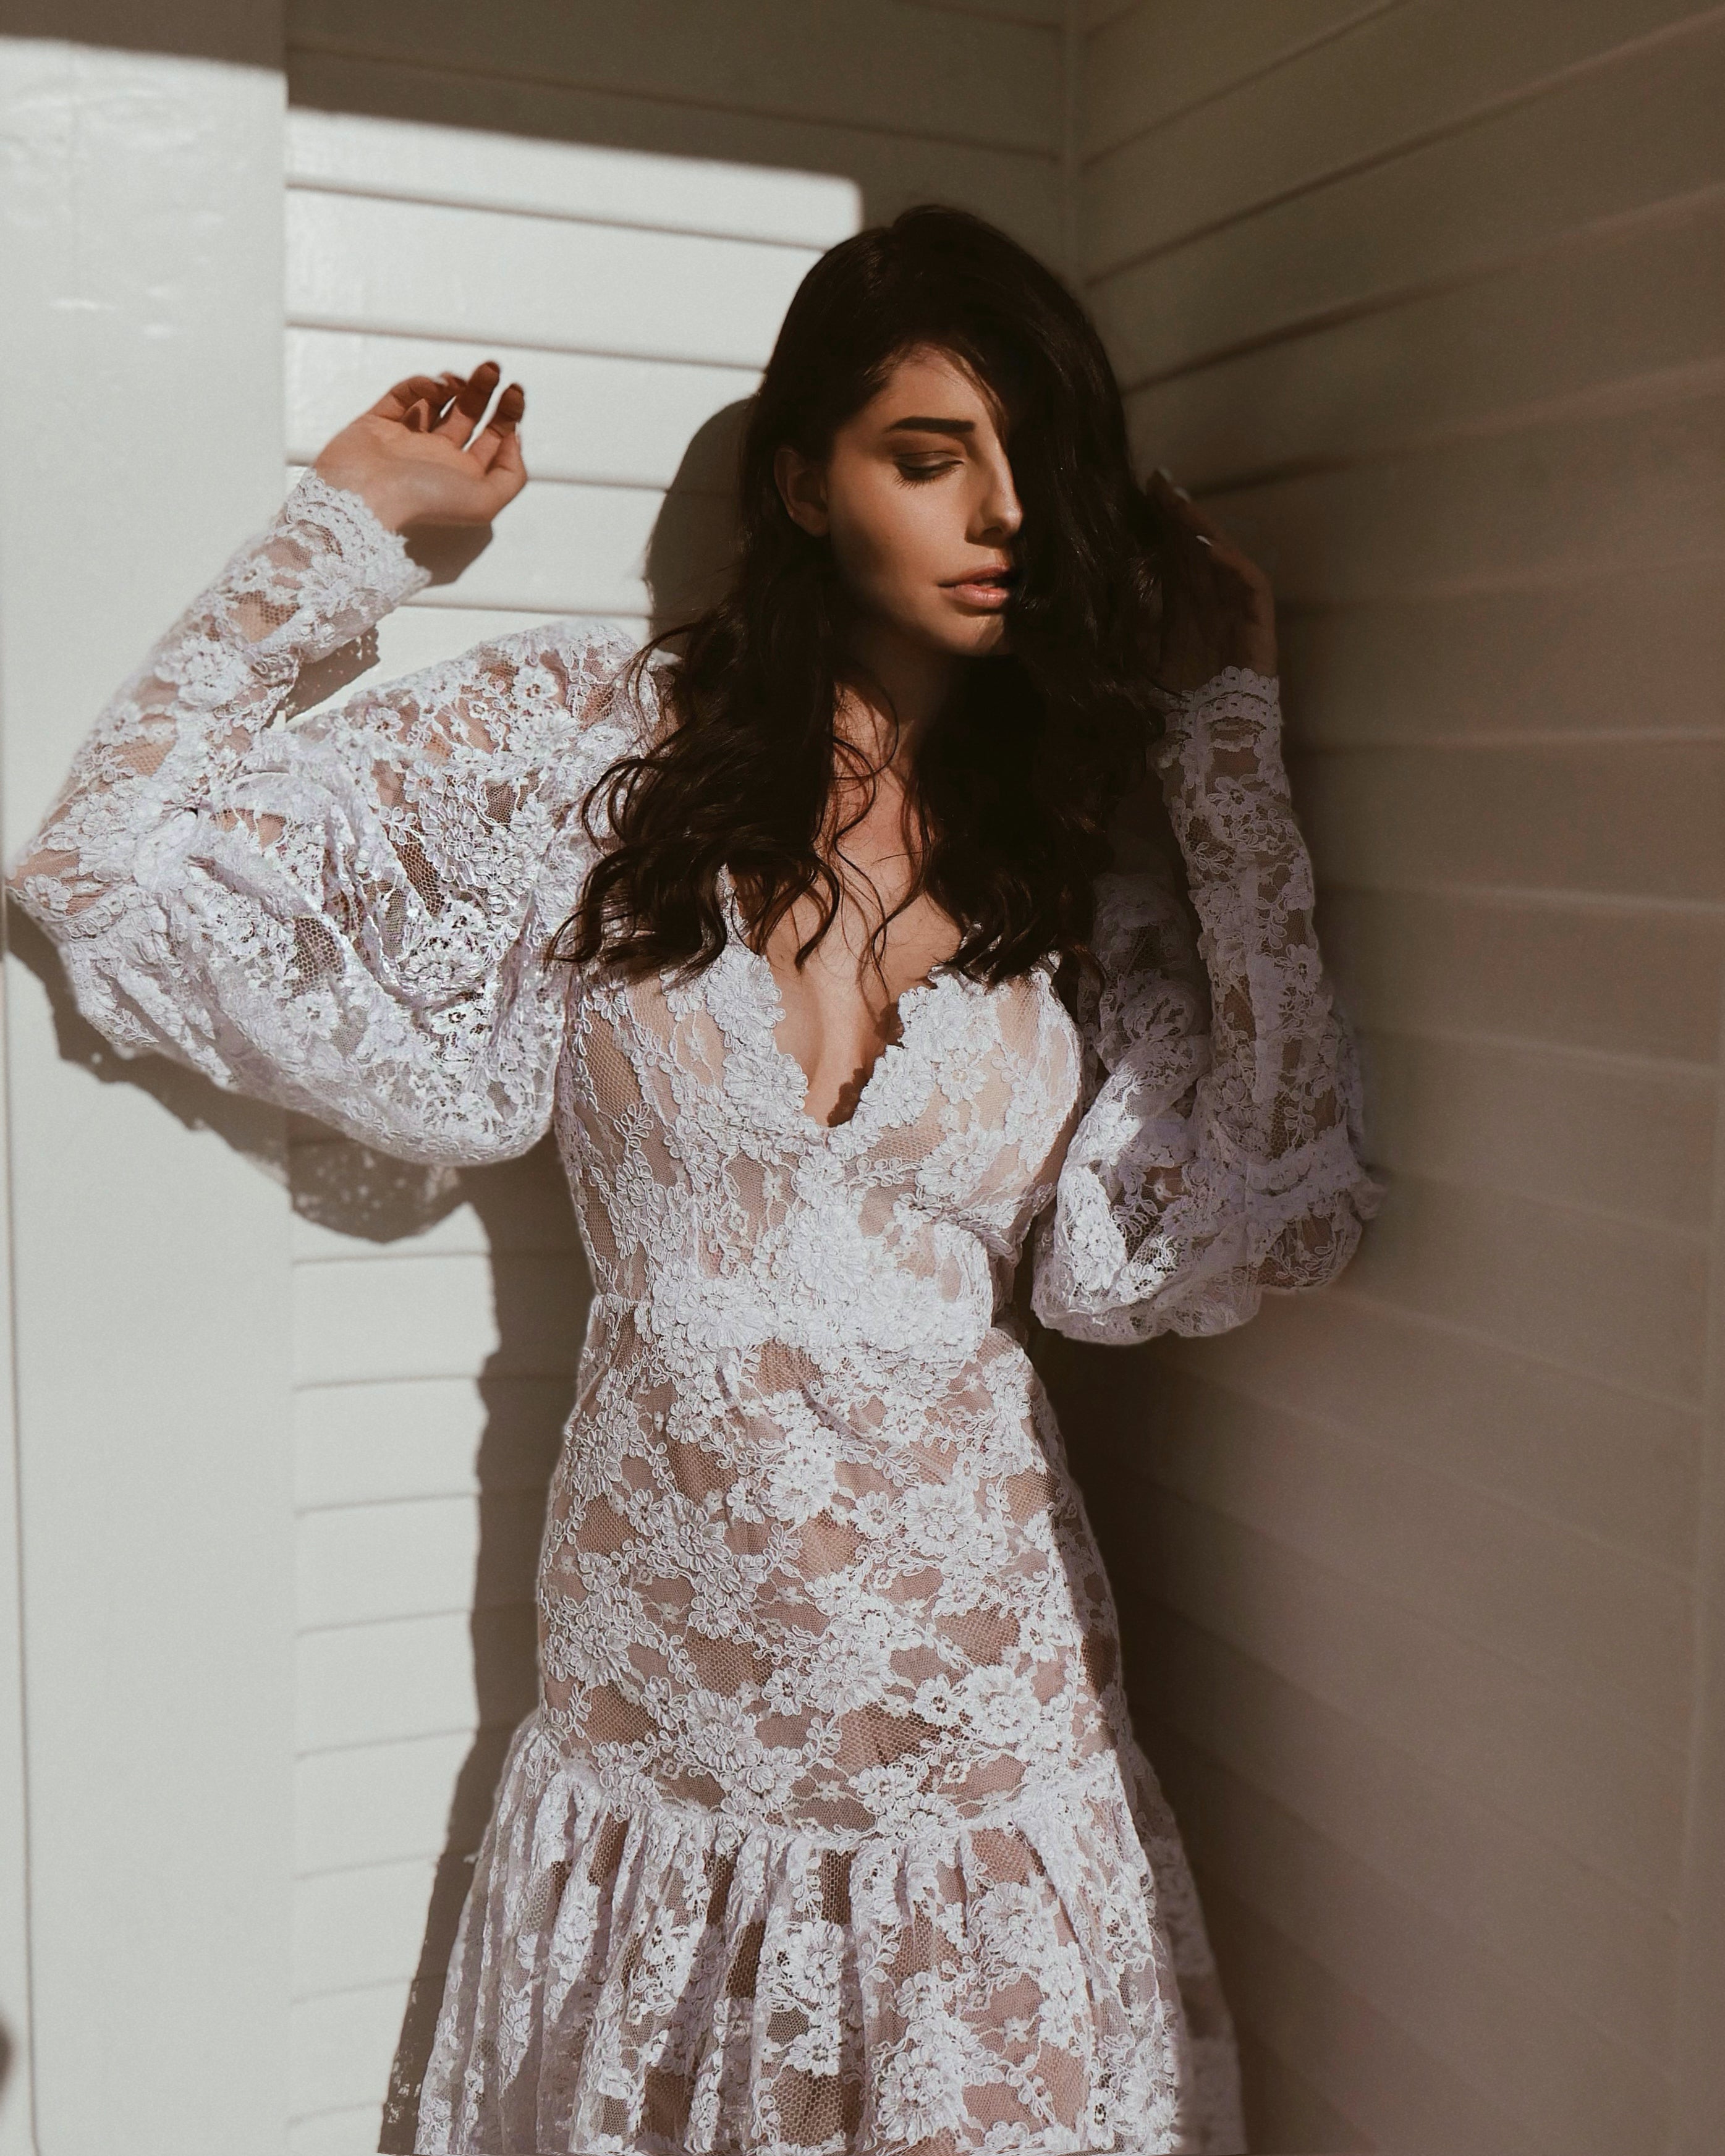 Front - A model poses in the Lauren Elaine "Meadow" gown with lace sleeves.